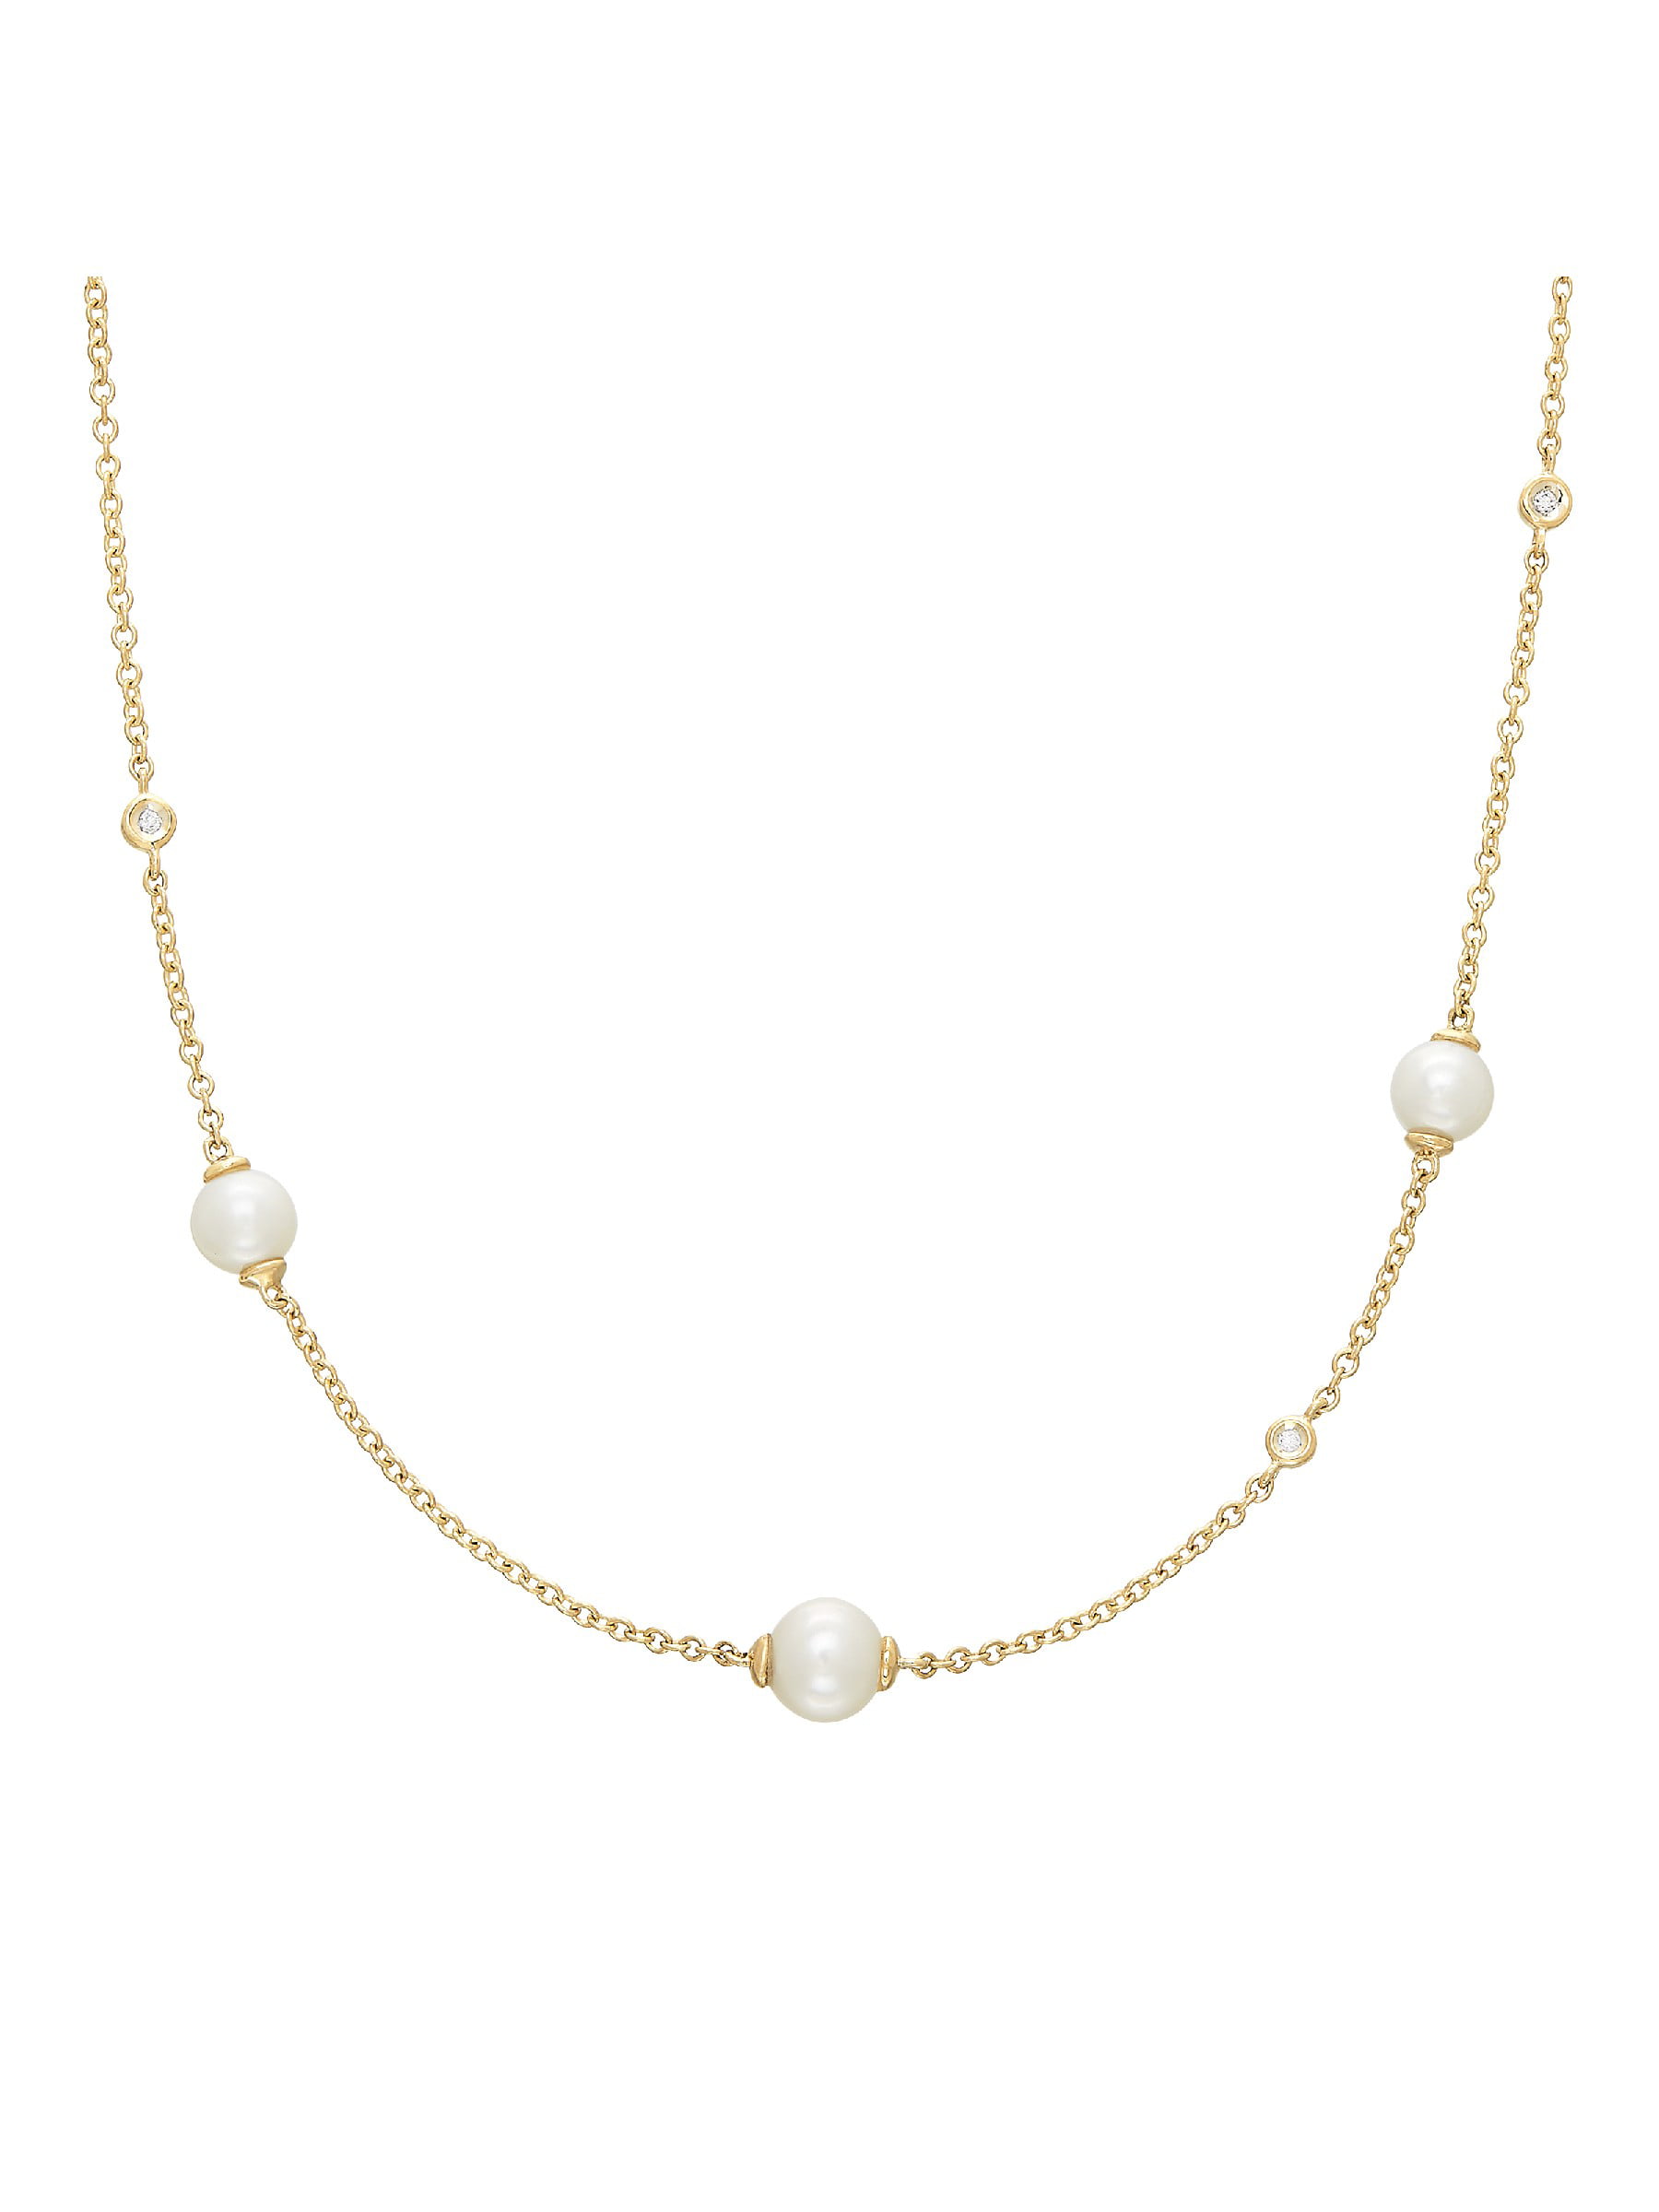 Honora - Women's Honora 5-5.5 mm Freshwater Pearl Necklace with ...